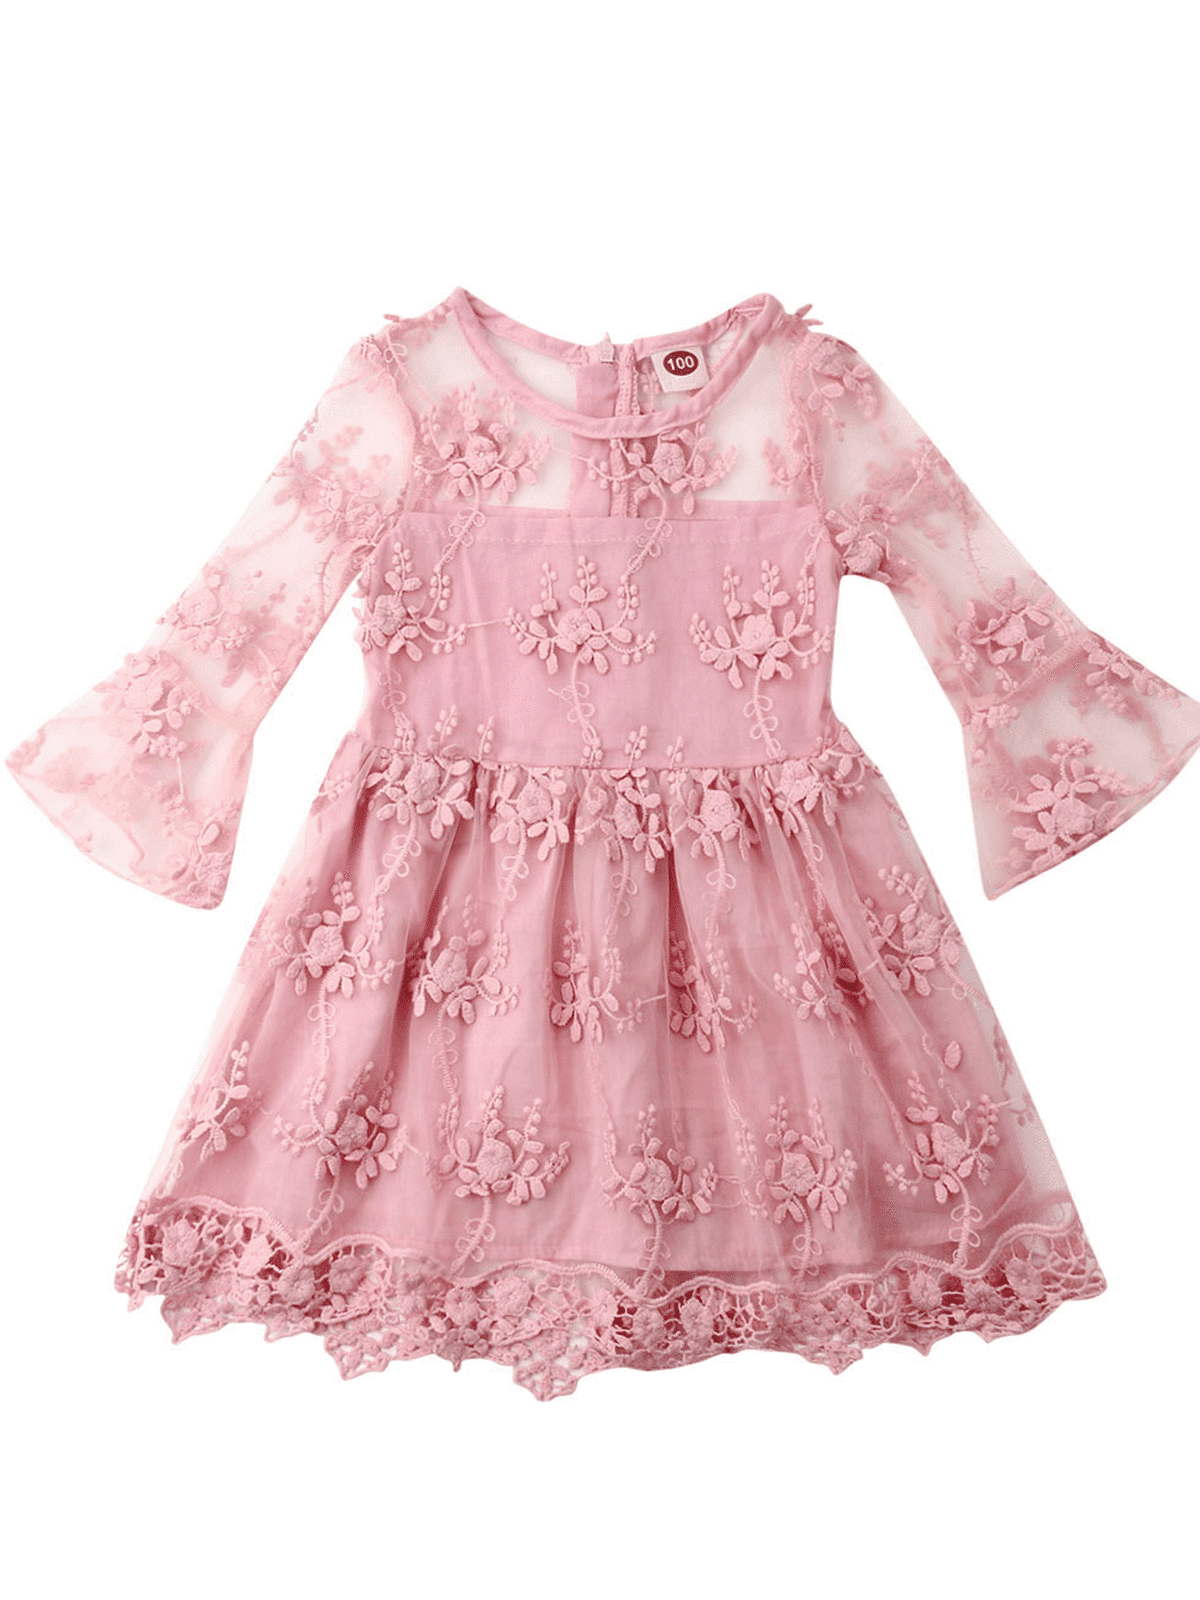 Details about   THE CHILDRENS PLACE Toddler Girl Floral Lace Dress Size 4T NWT